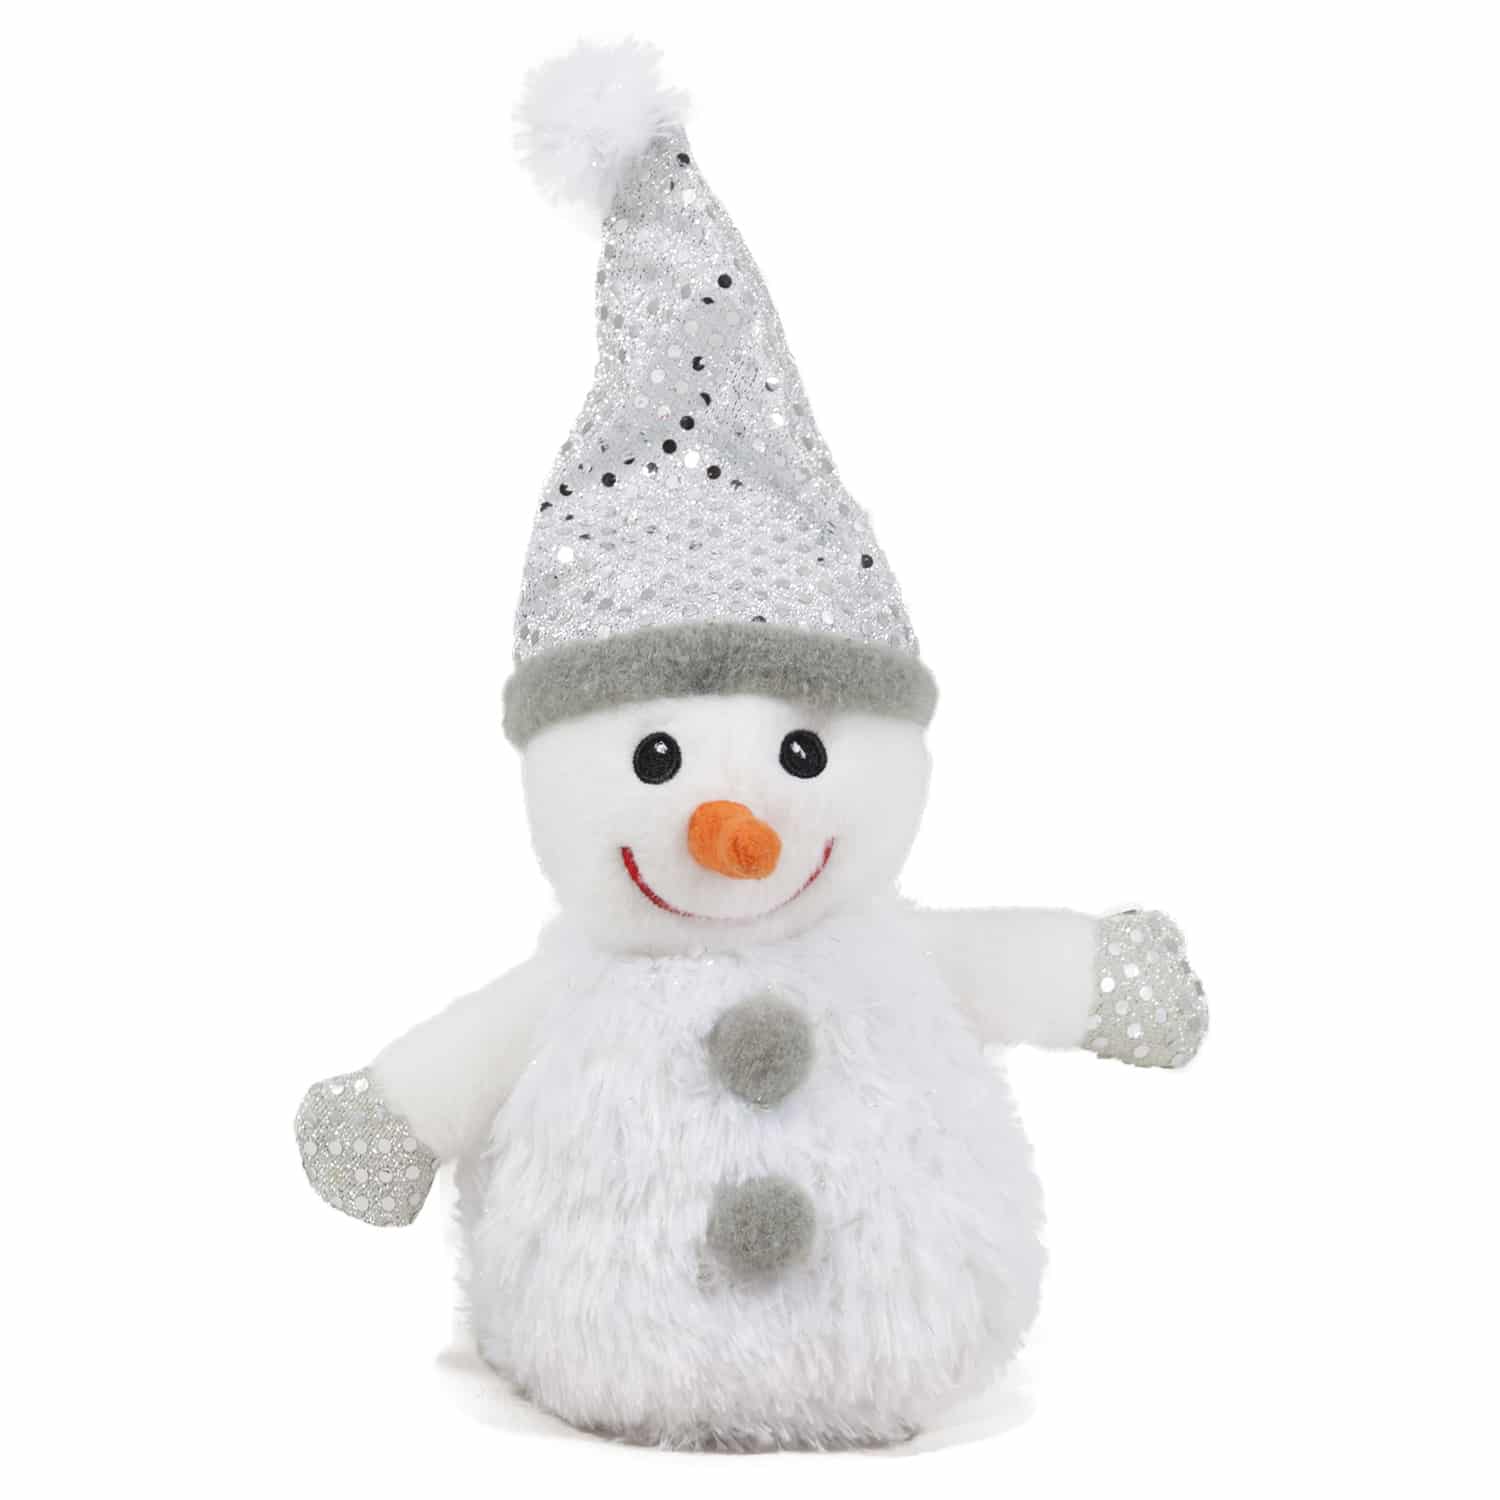 Snowman with hat - Grey